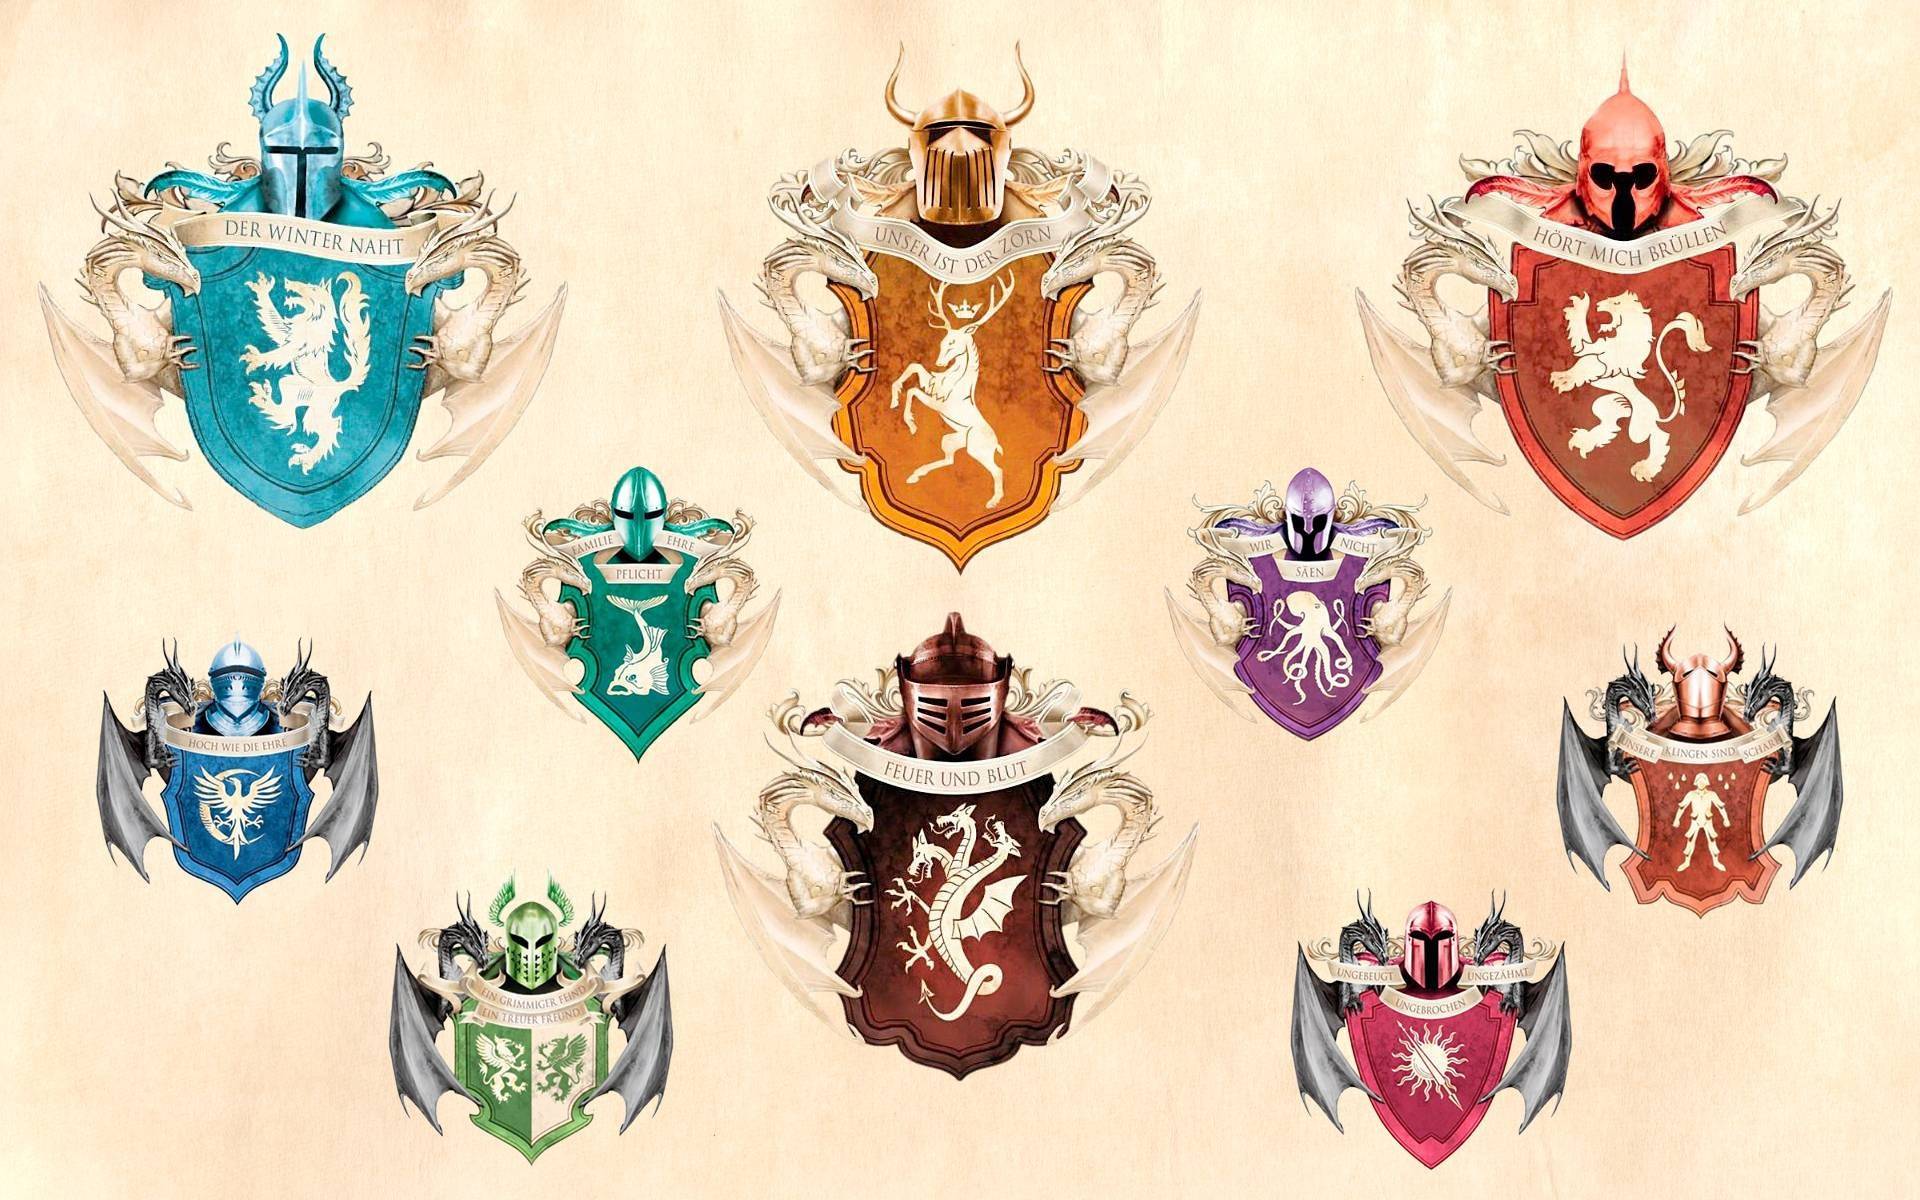 The Houses from A Song of Ice and Fire(Game of Thrones)